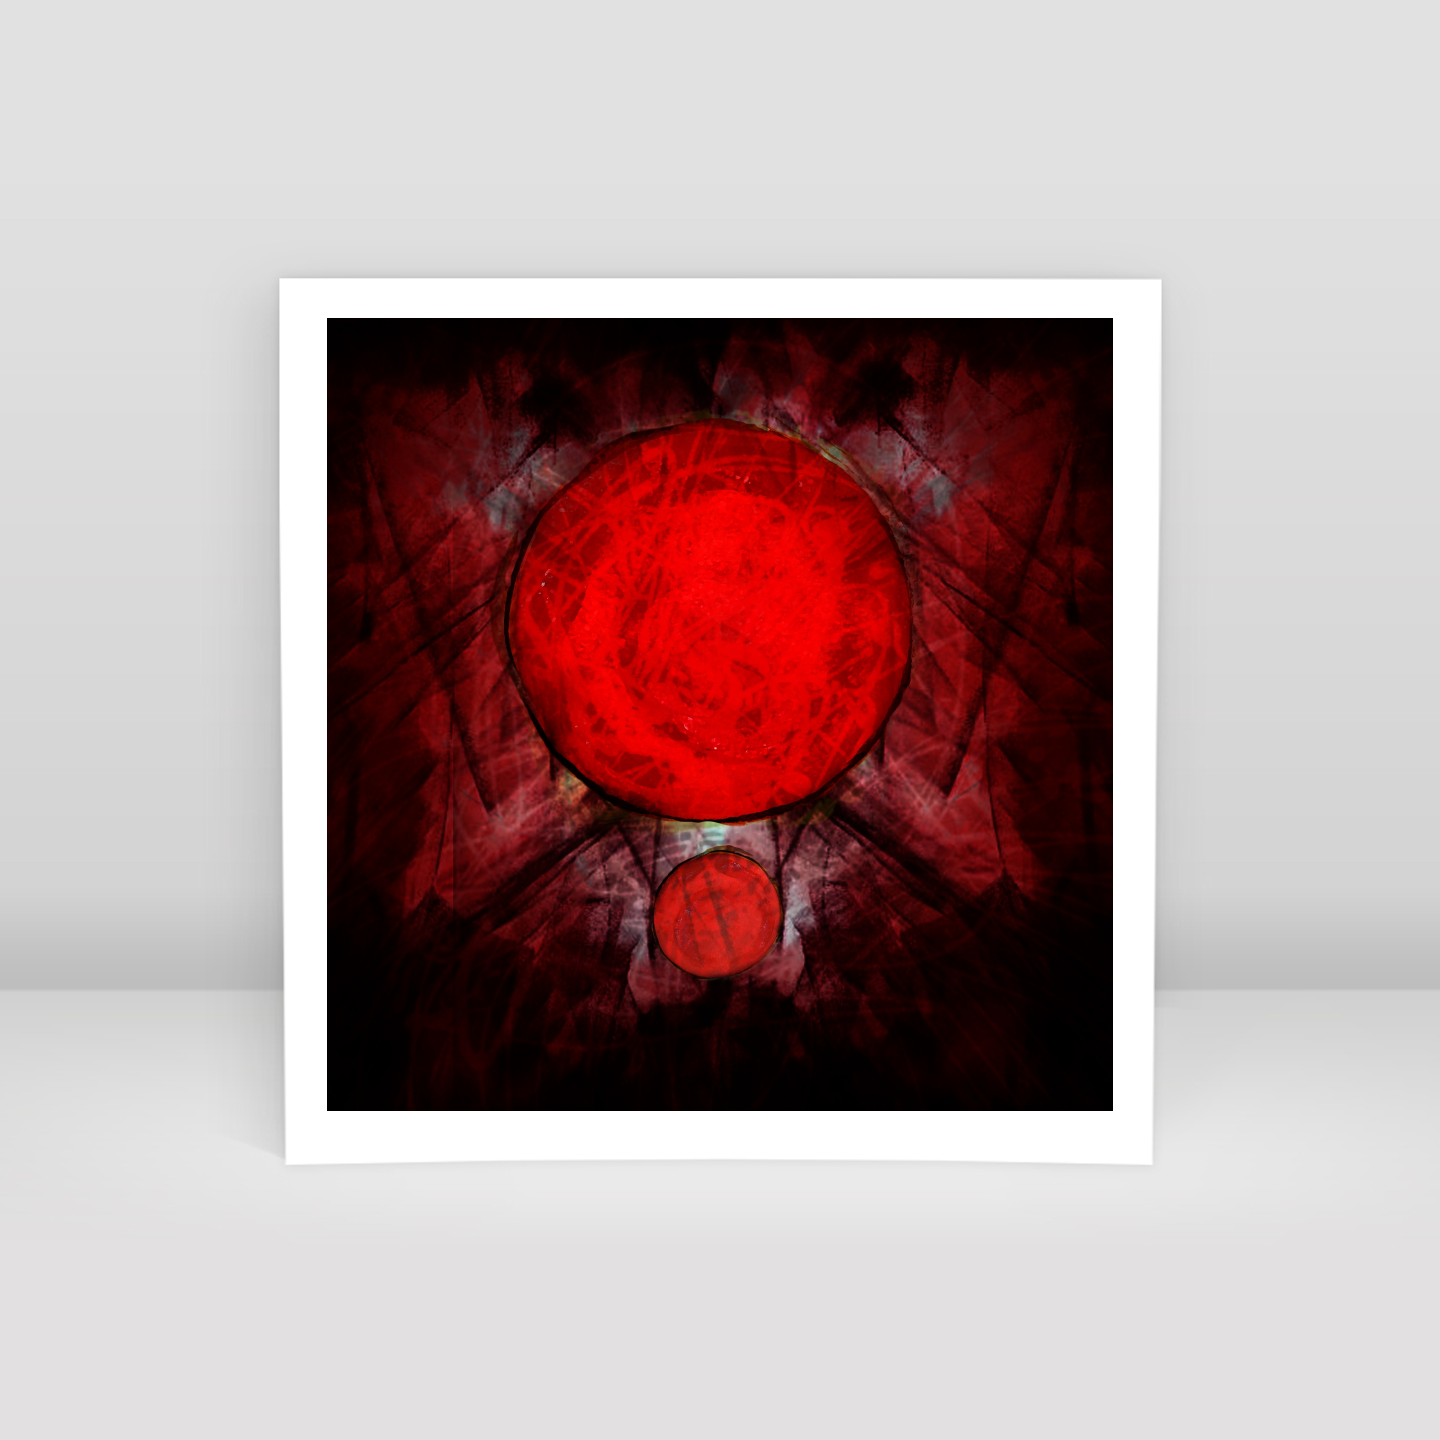 Big Red Dot and Her Little Red Dotie 07 - Art Print